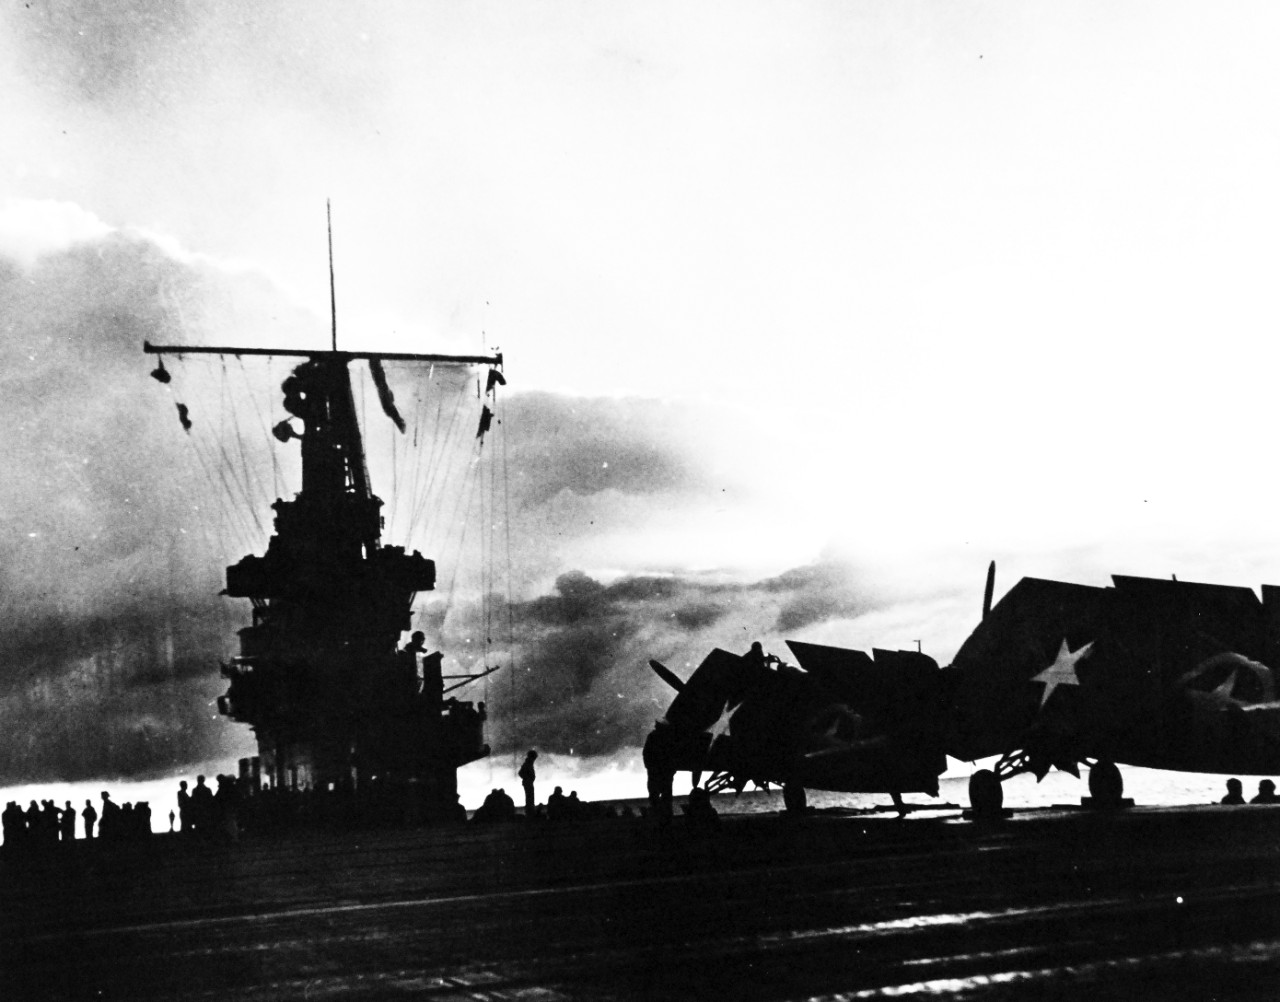 <p>80-G-30356: Operation Torch, November 1942. Sunset over French Morocco on the evening of the day Allied forces invaded North Africa. Dark in the gathering gloom, planes of U.S. aircraft carrier seem to rest beneath their wings on the flight deck of their ship. Photograph released October 27, 1943.&nbsp;</p>
